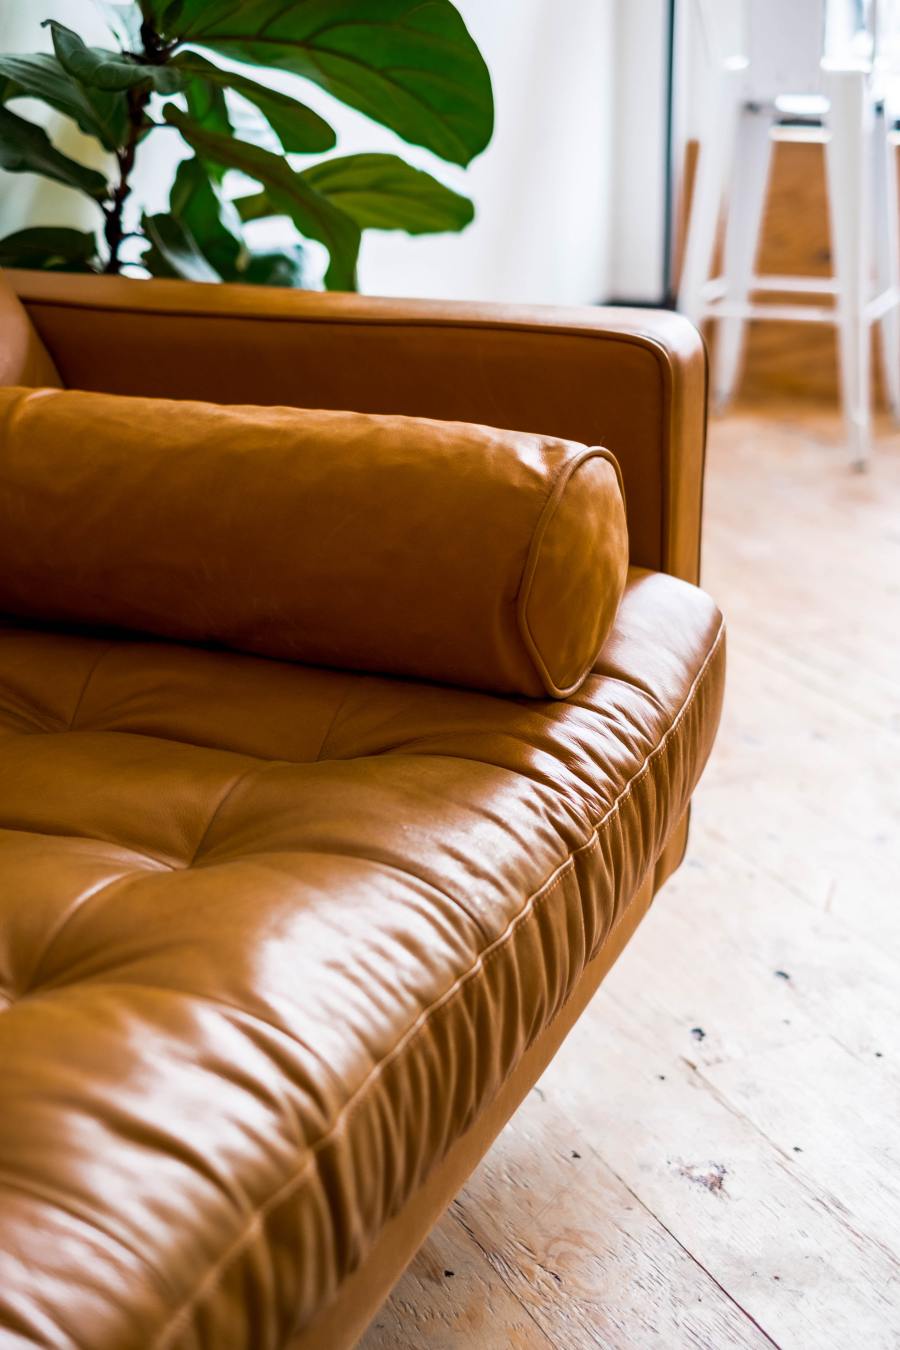 How to Clean a Leather Couch: Safe Tips for Leather Care